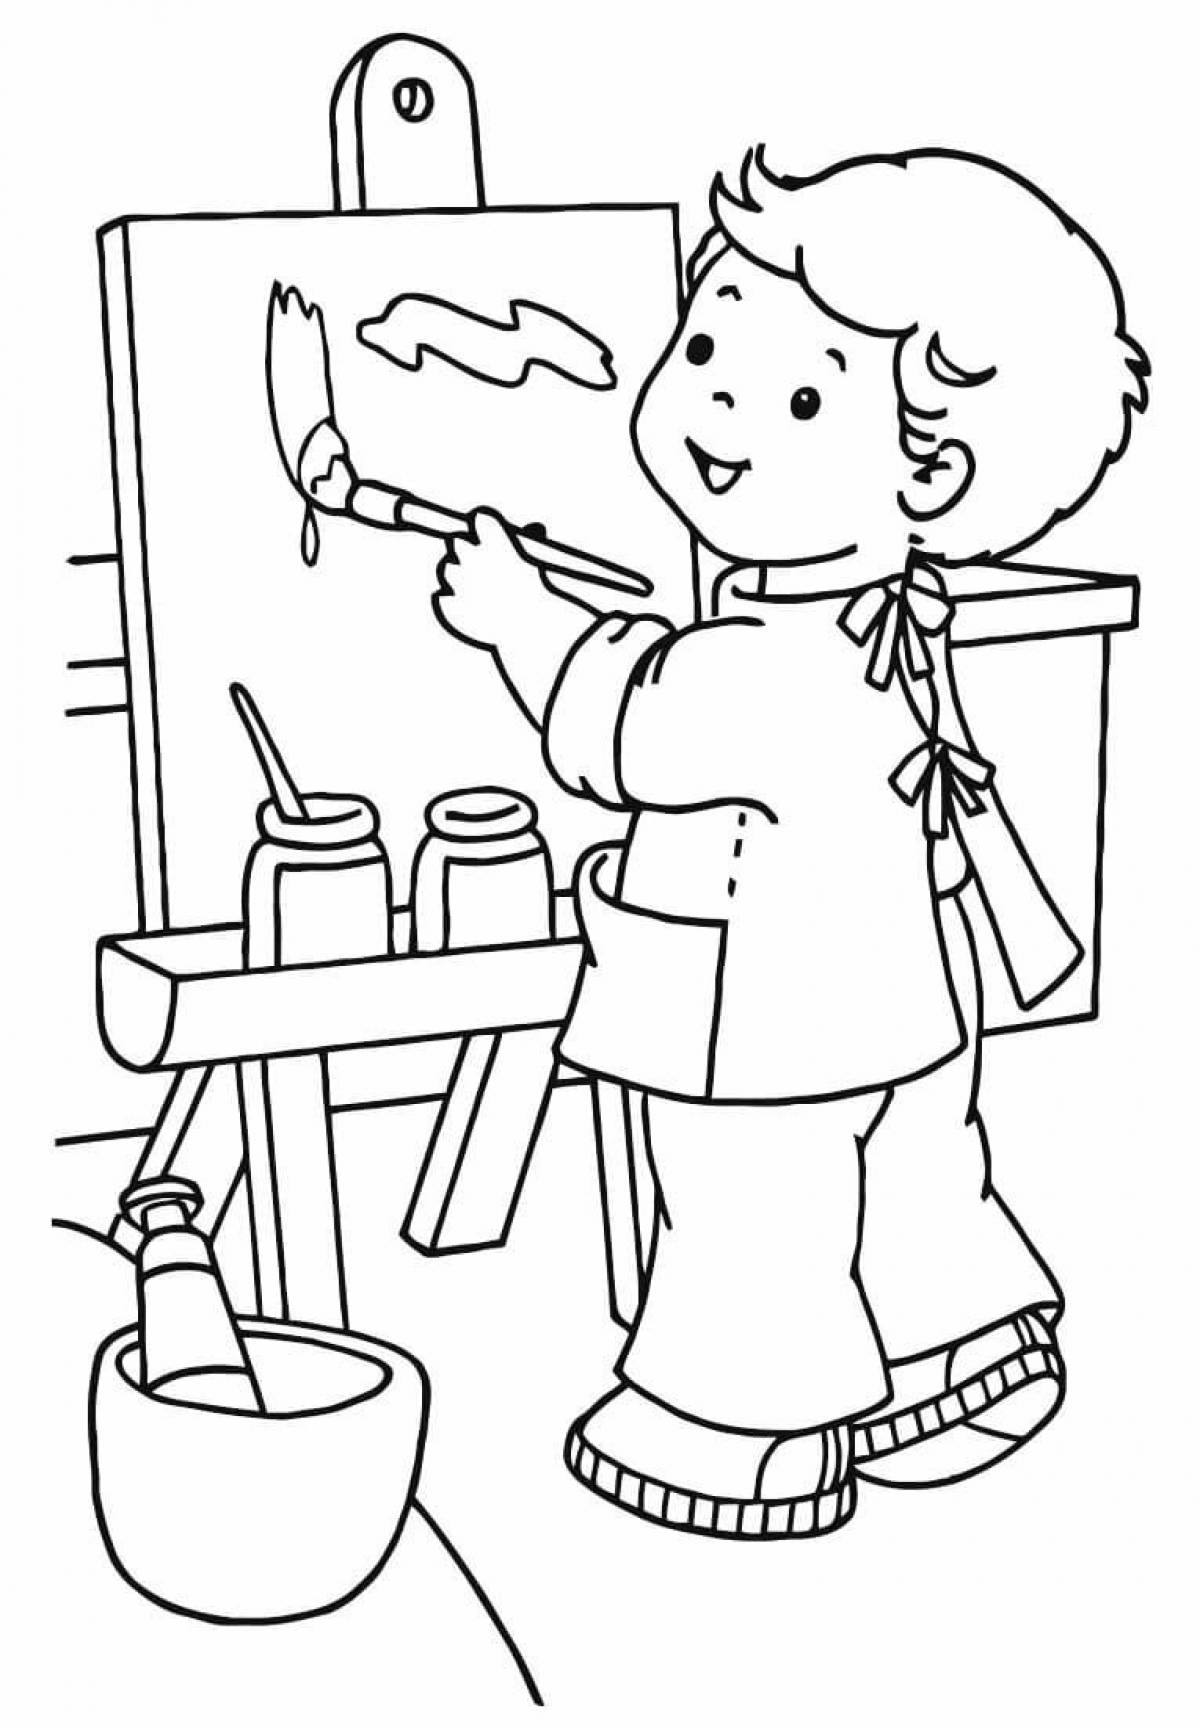 Exciting waiter coloring book